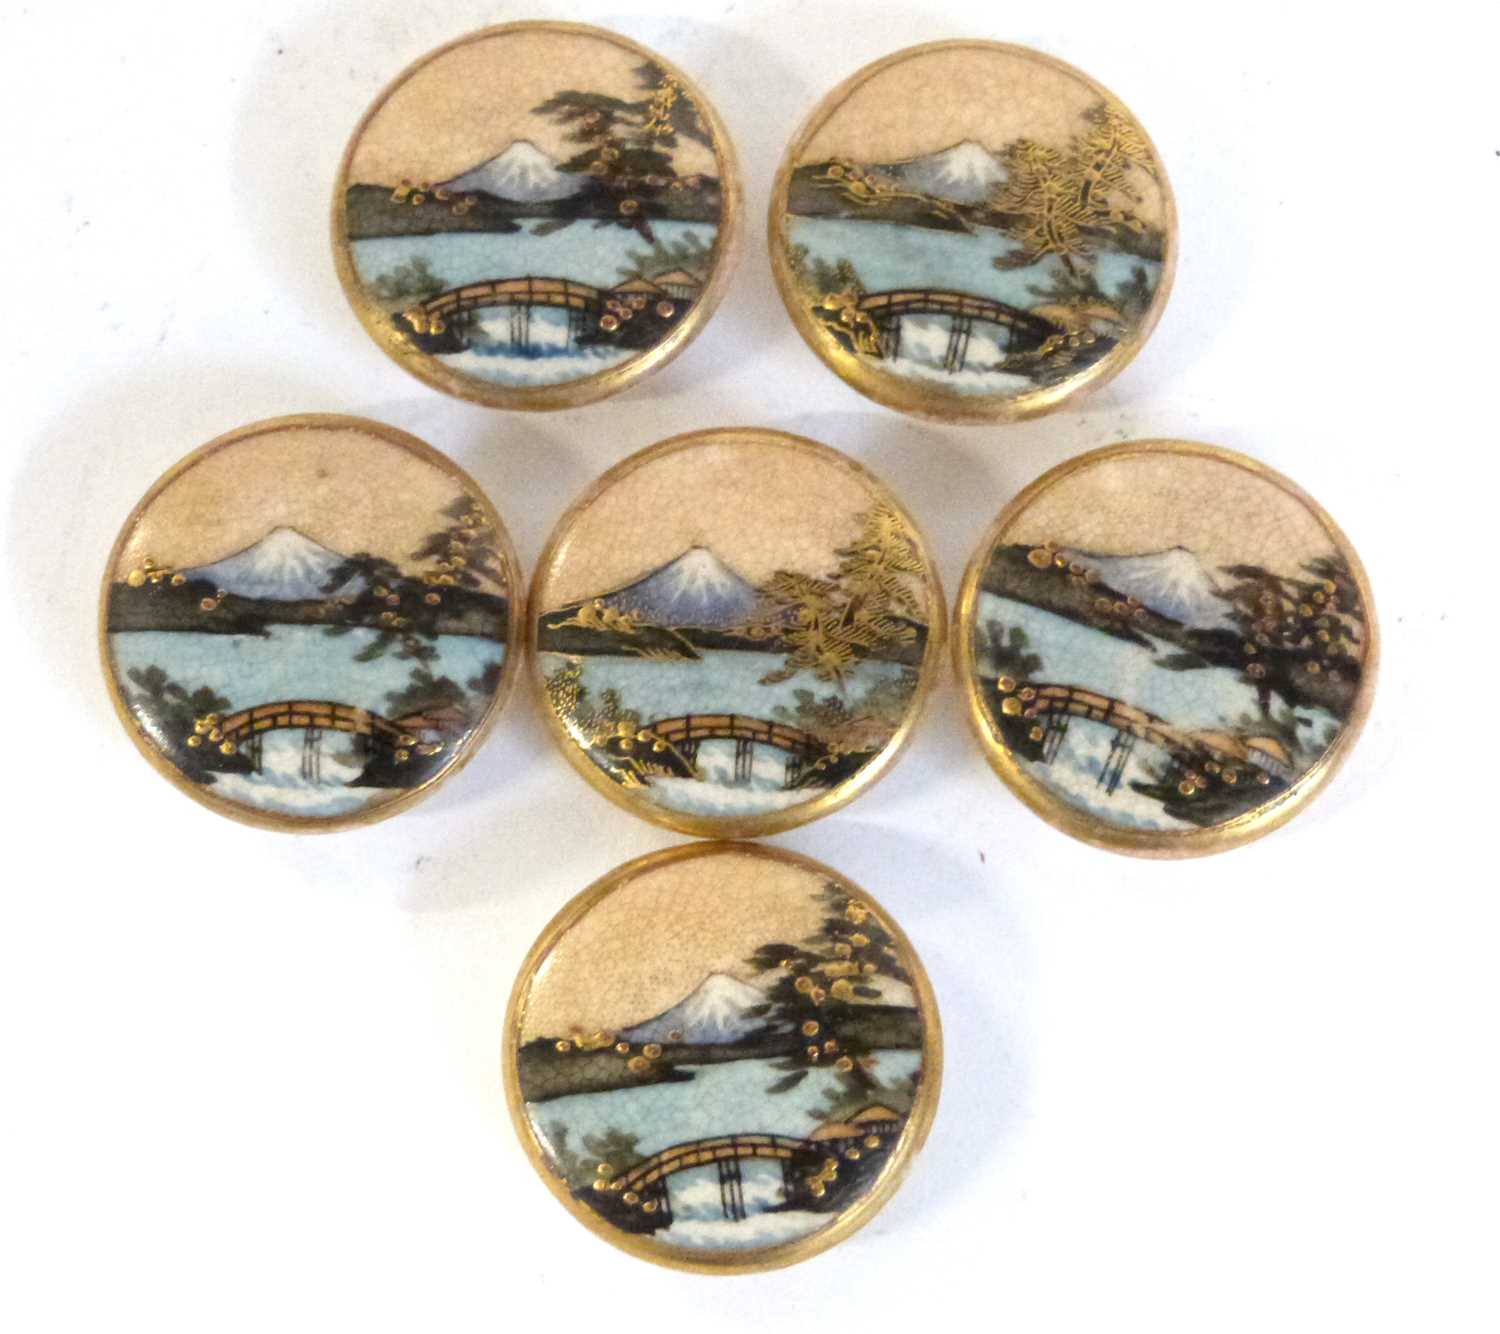 A small bag containing five Japanese Satsuma ware buttons, all decorated with views of Mount Fuji